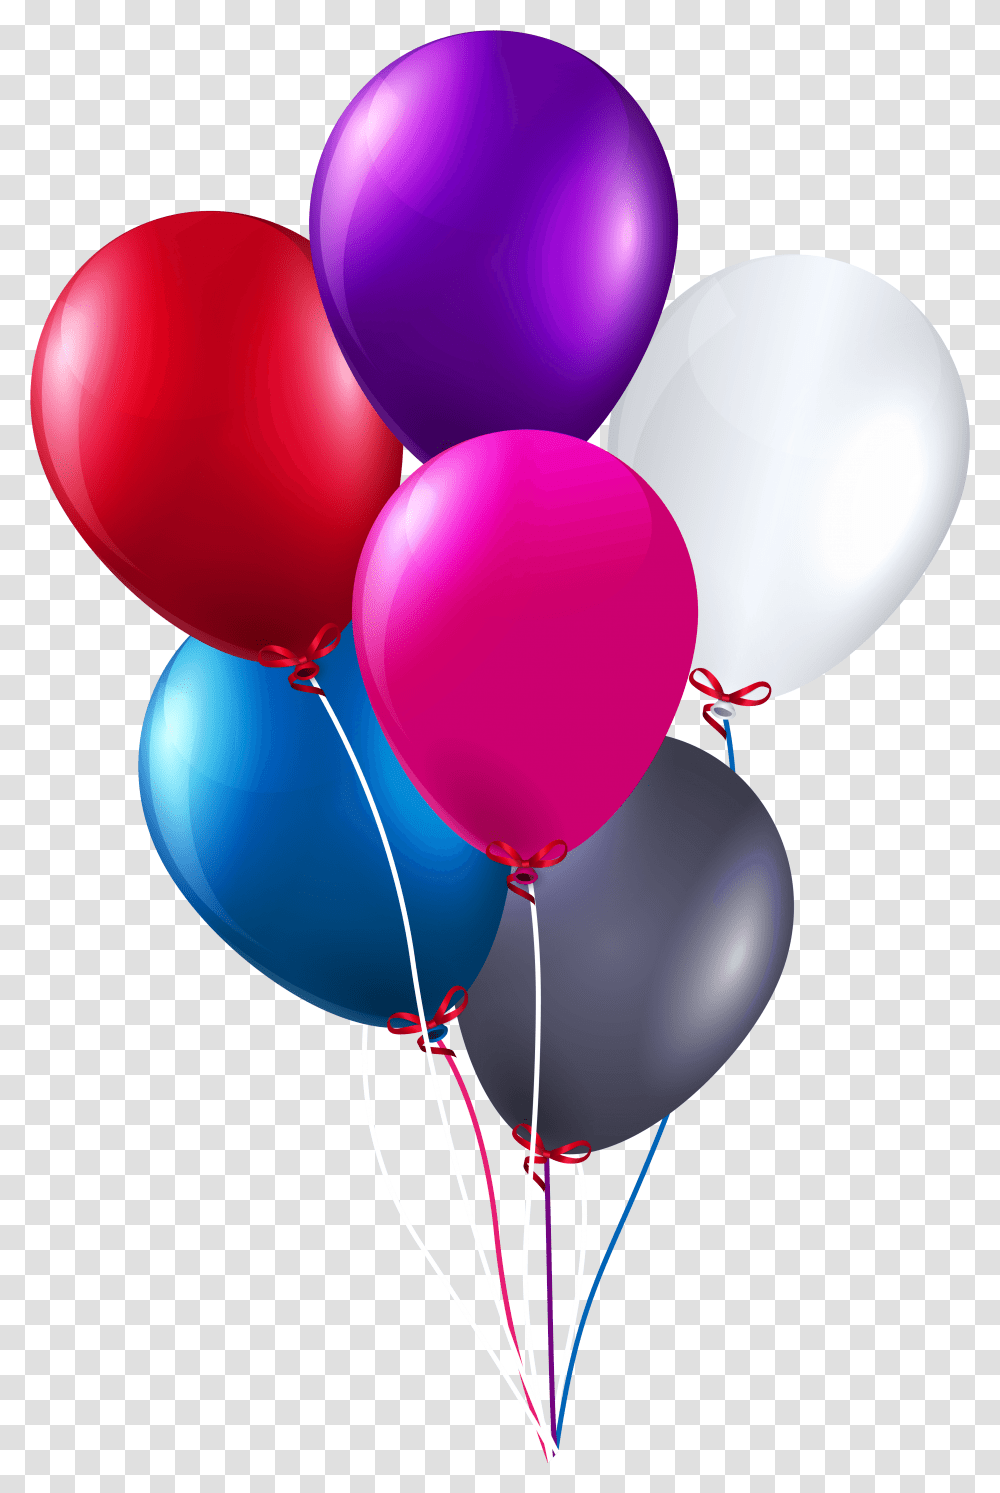 Colorful Bunch Of Balloons Clipart Image Birthday Balloons Clipart, Sphere Transparent Png